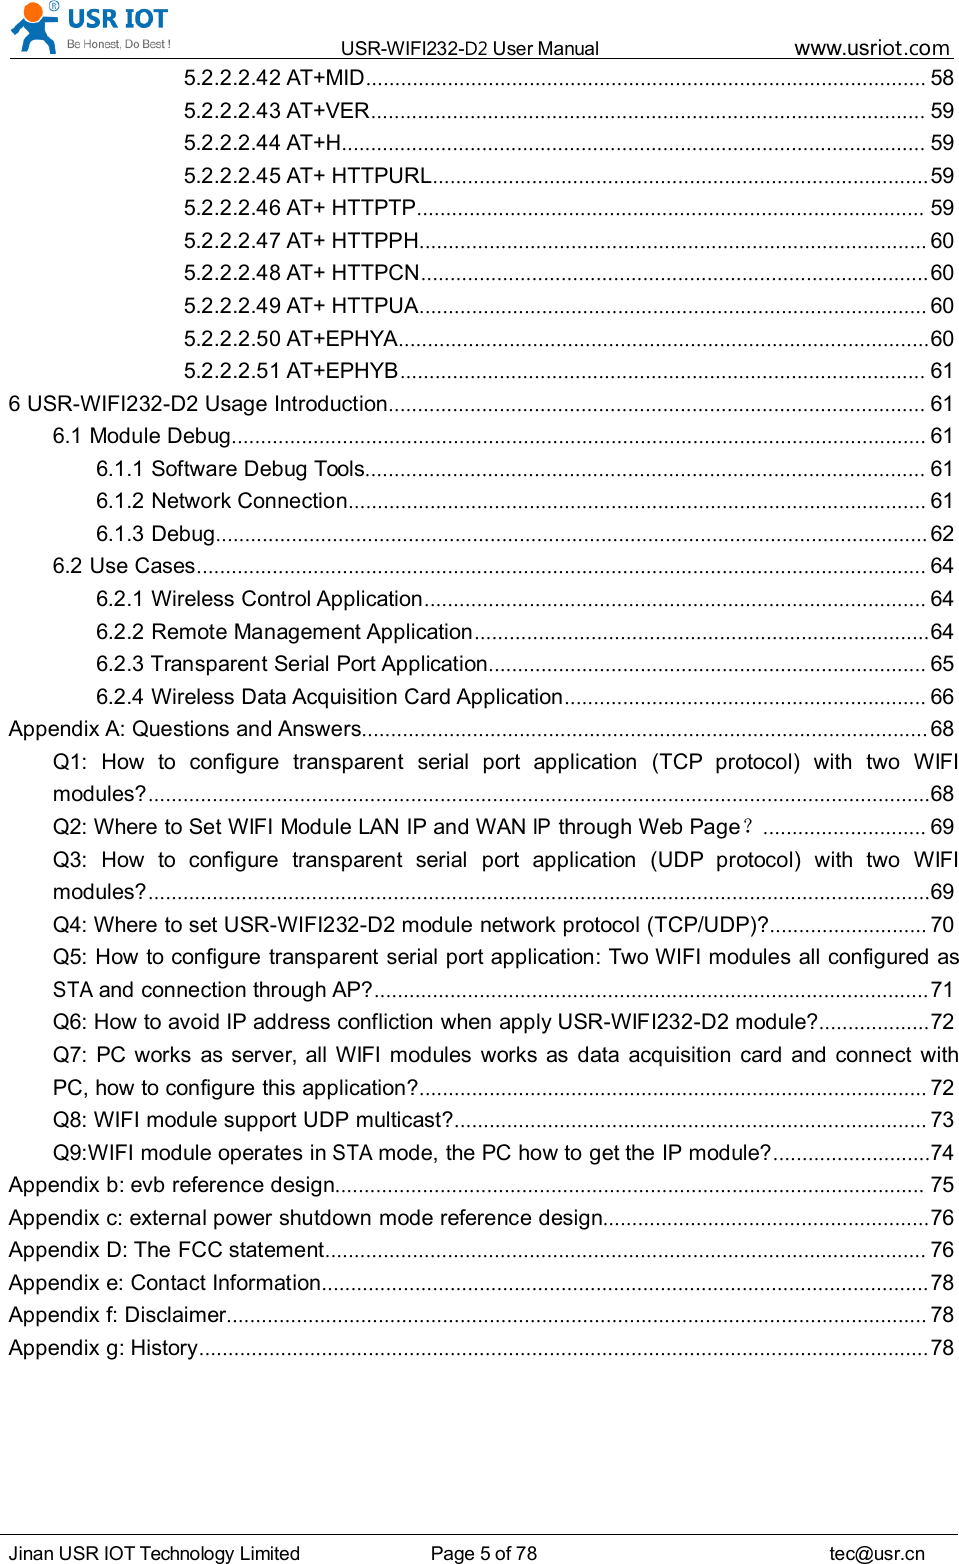 USR-WIFI232- D2 User Manual www.usr iot .comJinan USR IOT Technology Limited Page 5 of 78 tec@usr.cn5.2.2.2.42 AT+MID ................................................................................................ 585.2.2.2.43 AT+VER ............................................................................................... 595.2.2.2.44 AT+H .................................................................................................... 595.2.2.2.45 AT+ HTTPURL ..................................................................................... 595.2.2.2.46 AT+ HTTPTP ....................................................................................... 595.2.2.2.47 AT+ HTTPPH ....................................................................................... 605.2.2.2.48 AT+ HTTPCN ....................................................................................... 605.2.2.2.49 AT+ HTTPUA ....................................................................................... 605.2.2.2.50 AT+EPHYA ........................................................................................... 605.2.2.2.51 AT+EPHYB .......................................................................................... 616 USR-WIFI232-D2 Usage Introduction ............................................................................................ 616.1 Module Debug ....................................................................................................................... 616.1.1 Software Debug Tools ................................................................................................ 616.1.2 Network Connection ................................................................................................... 616.1.3 Debug .......................................................................................................................... 626.2 Use Cases ............................................................................................................................. 646.2.1 Wireless Control Application ...................................................................................... 646.2.2 Remote Management Application .............................................................................. 646.2.3 Transparent Serial Port Application ........................................................................... 656.2.4 Wireless Data Acquisition Card Application .............................................................. 66Appendix A: Questions and Answers ................................................................................................. 68Q1: How to configure transparent serial port application (TCP protocol) with two WIFImodules? ...................................................................................................................................... 68Q2: Where to Set WIFI Module LAN IP and WANIPthrough Web Page ？............................ 69Q3: How to configure transparent serial port application (UDP protocol) with two WIFImodules? ...................................................................................................................................... 69Q4: Where to set USR-WIFI232-D2 module network protocol (TCP/UDP)? ........................... 70Q5: How to configure transparent serial port application: Two WIFI modules all configured asSTAand connection through AP? ............................................................................................... 71Q6: How to avoid IP address confliction when apply USR-WIFI232-D2 module? ................... 72Q7: PC works as server, all WIFI modules works as data acquisition card and connect withPC, how to configure this application? ....................................................................................... 72Q8: WIFI module support UDP multicast? ................................................................................. 73Q9:WIFI module operates inSTAmode, the PC how to get the IP module? ........................... 74Appendix b: evb reference design ..................................................................................................... 75Appendix c: external power shutdown mode reference design ........................................................ 76Appendix D: The FCC statement ....................................................................................................... 76Appendix e: Contact Information ........................................................................................................ 78Appendix f: Disclaimer ........................................................................................................................ 78Appendix g: History ............................................................................................................................. 78